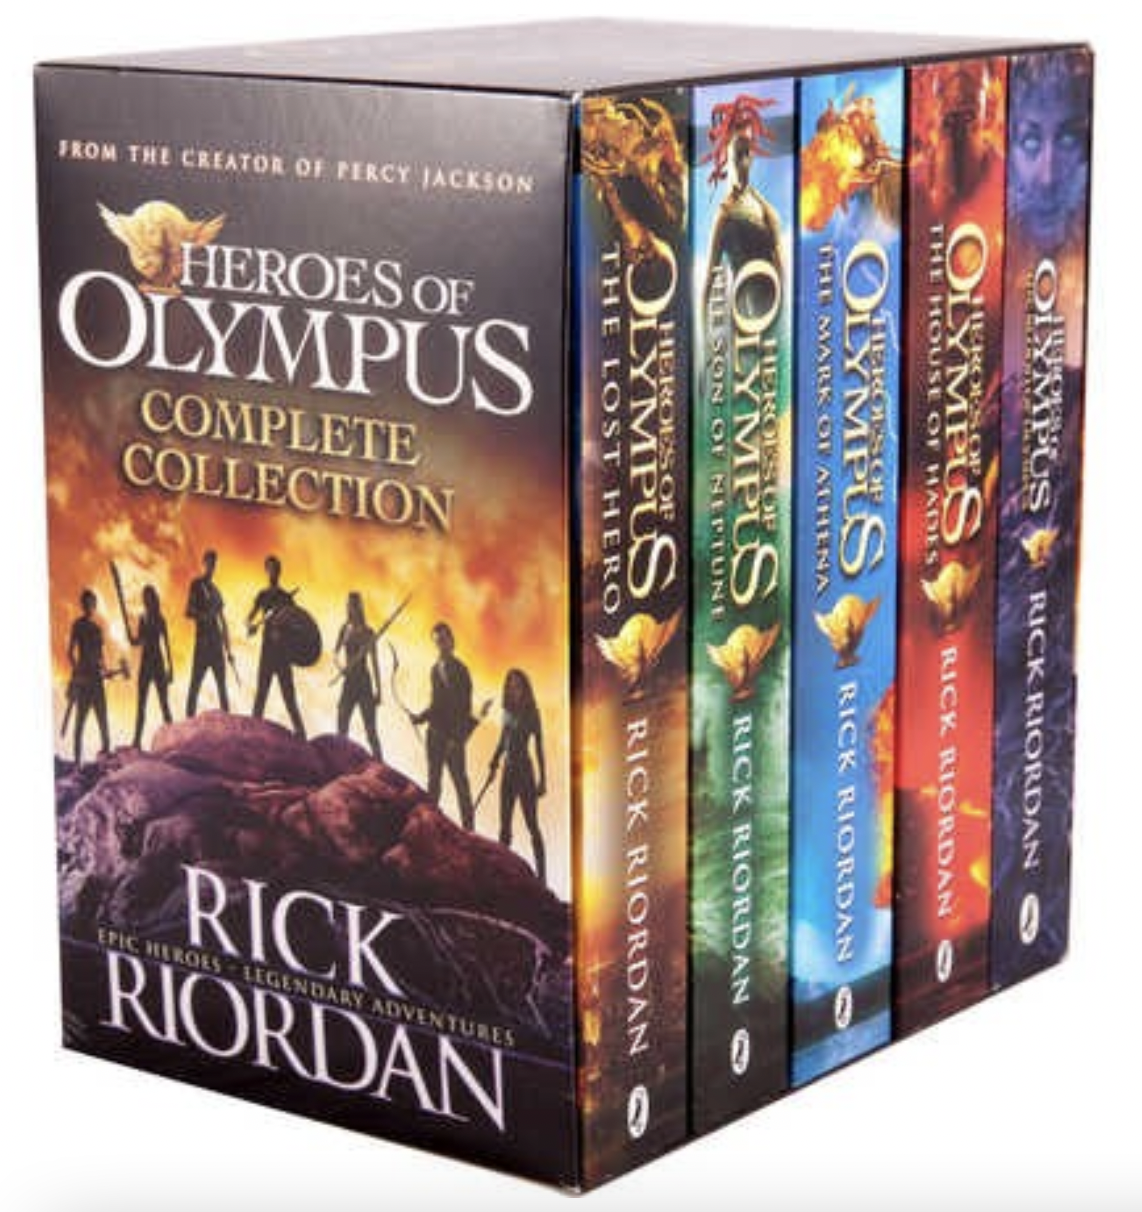 Heroes of Olympus Complete Collection 5 Book Slipcase by Rick Riordan